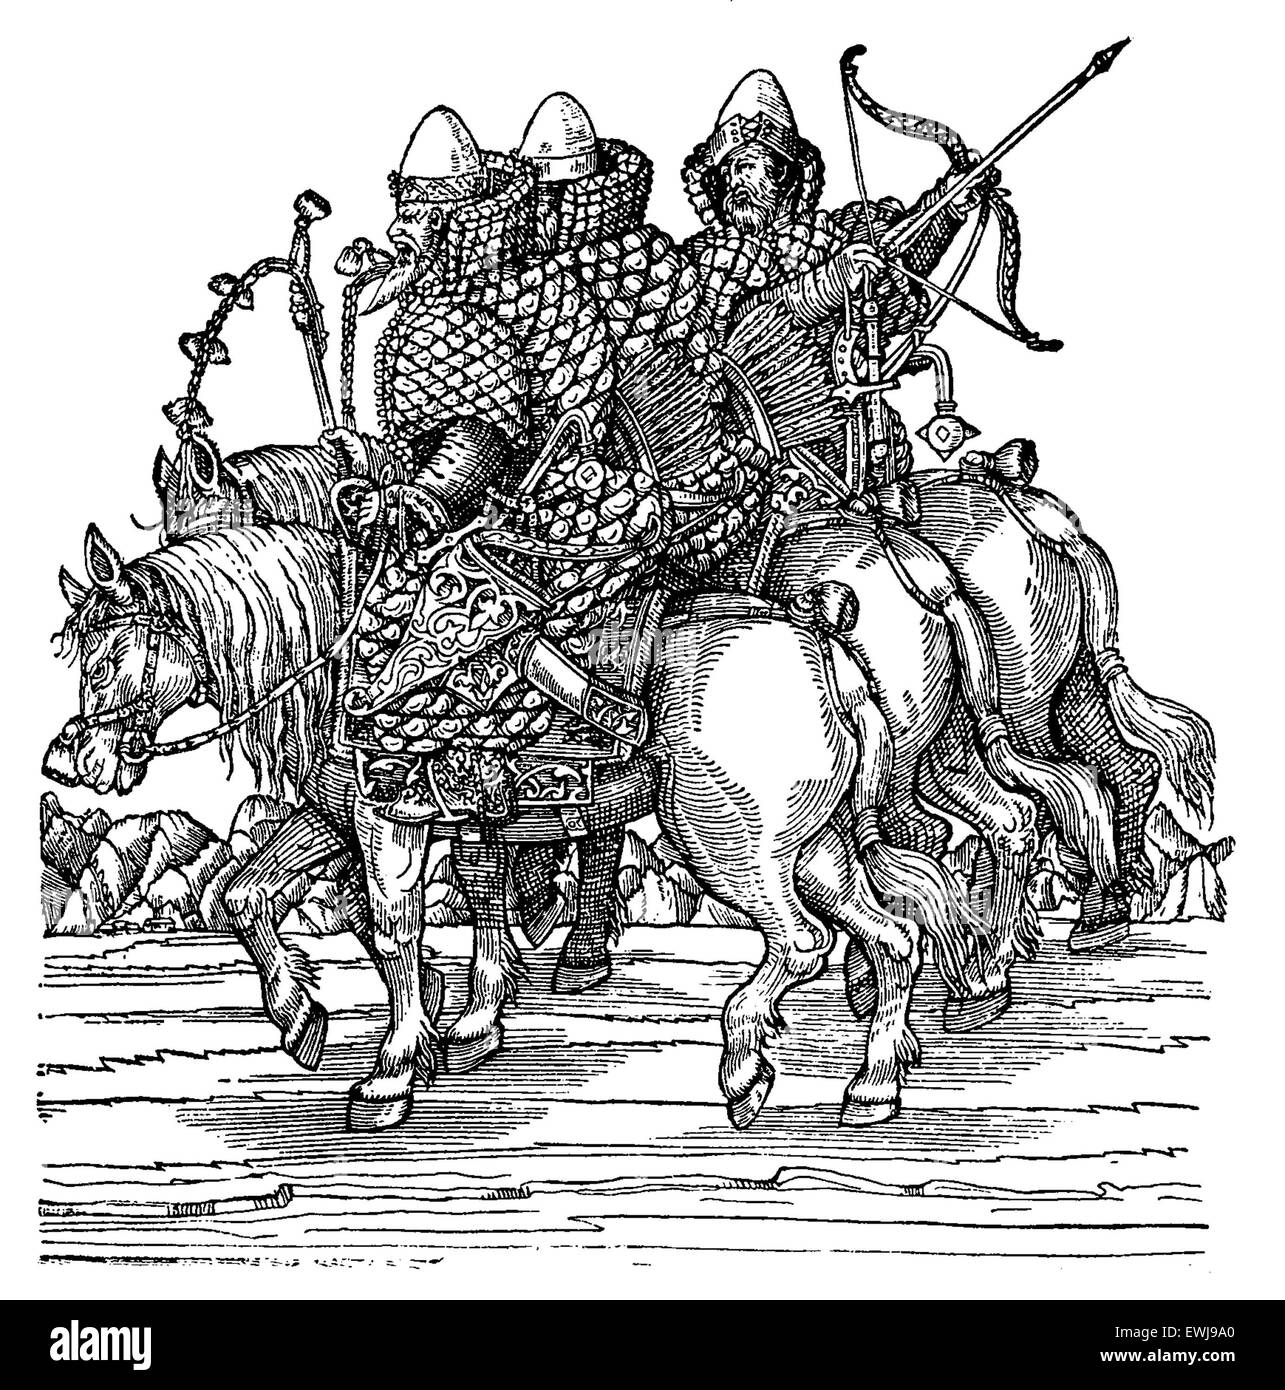 Engraving of 16th century Muscovy horsemen readying for battle Stock Photo